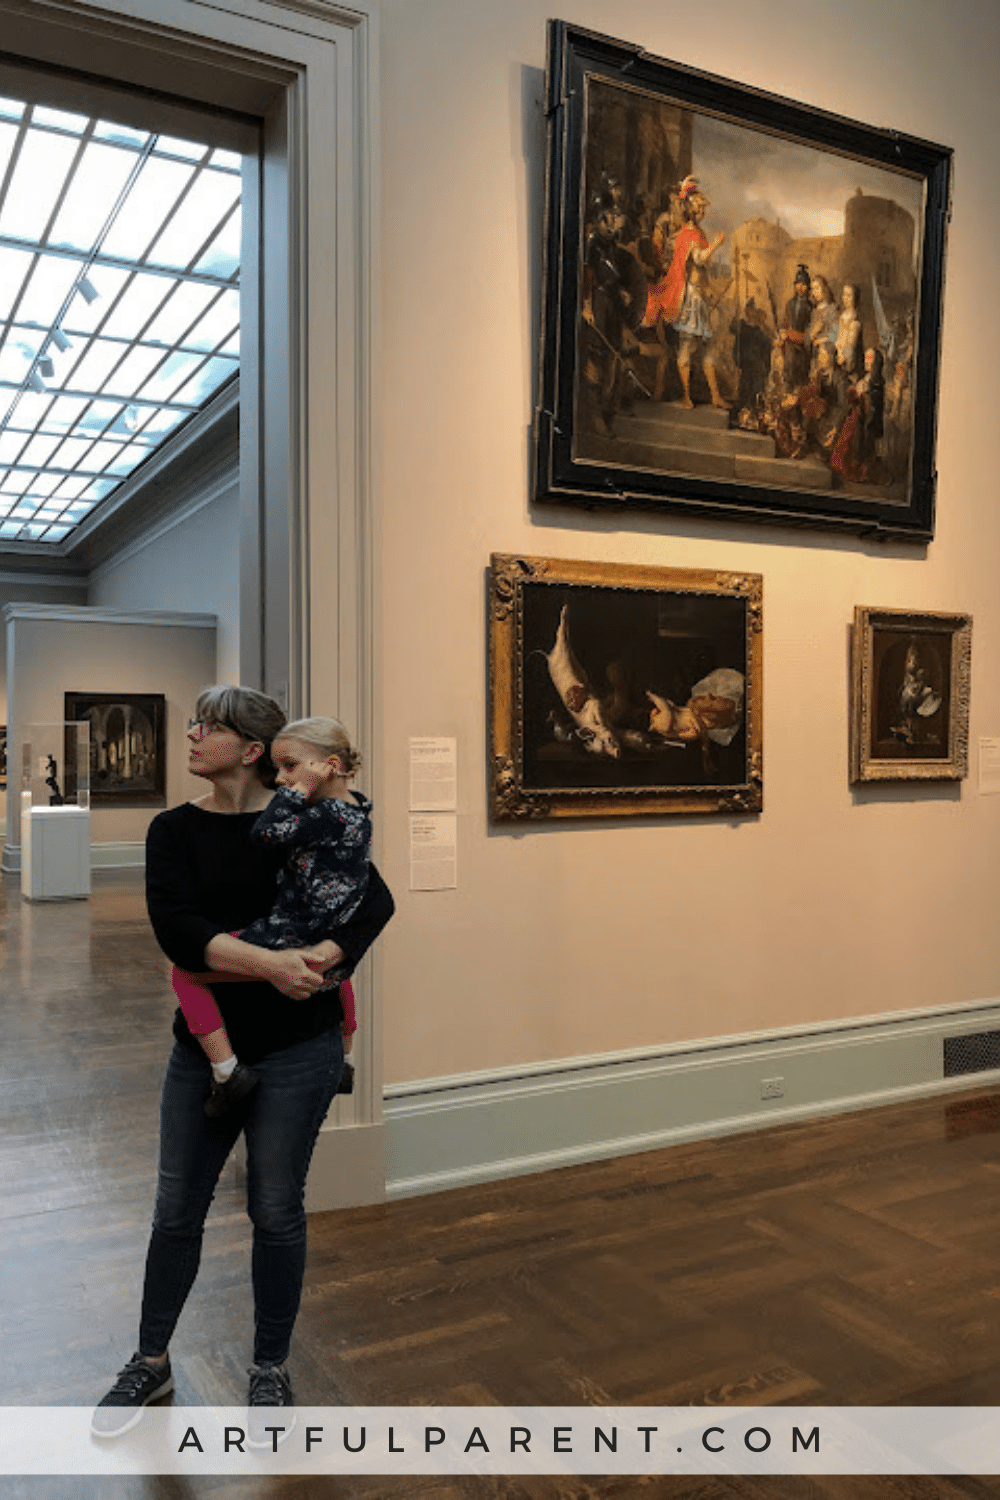 How to Visit an Art Museum with Kids